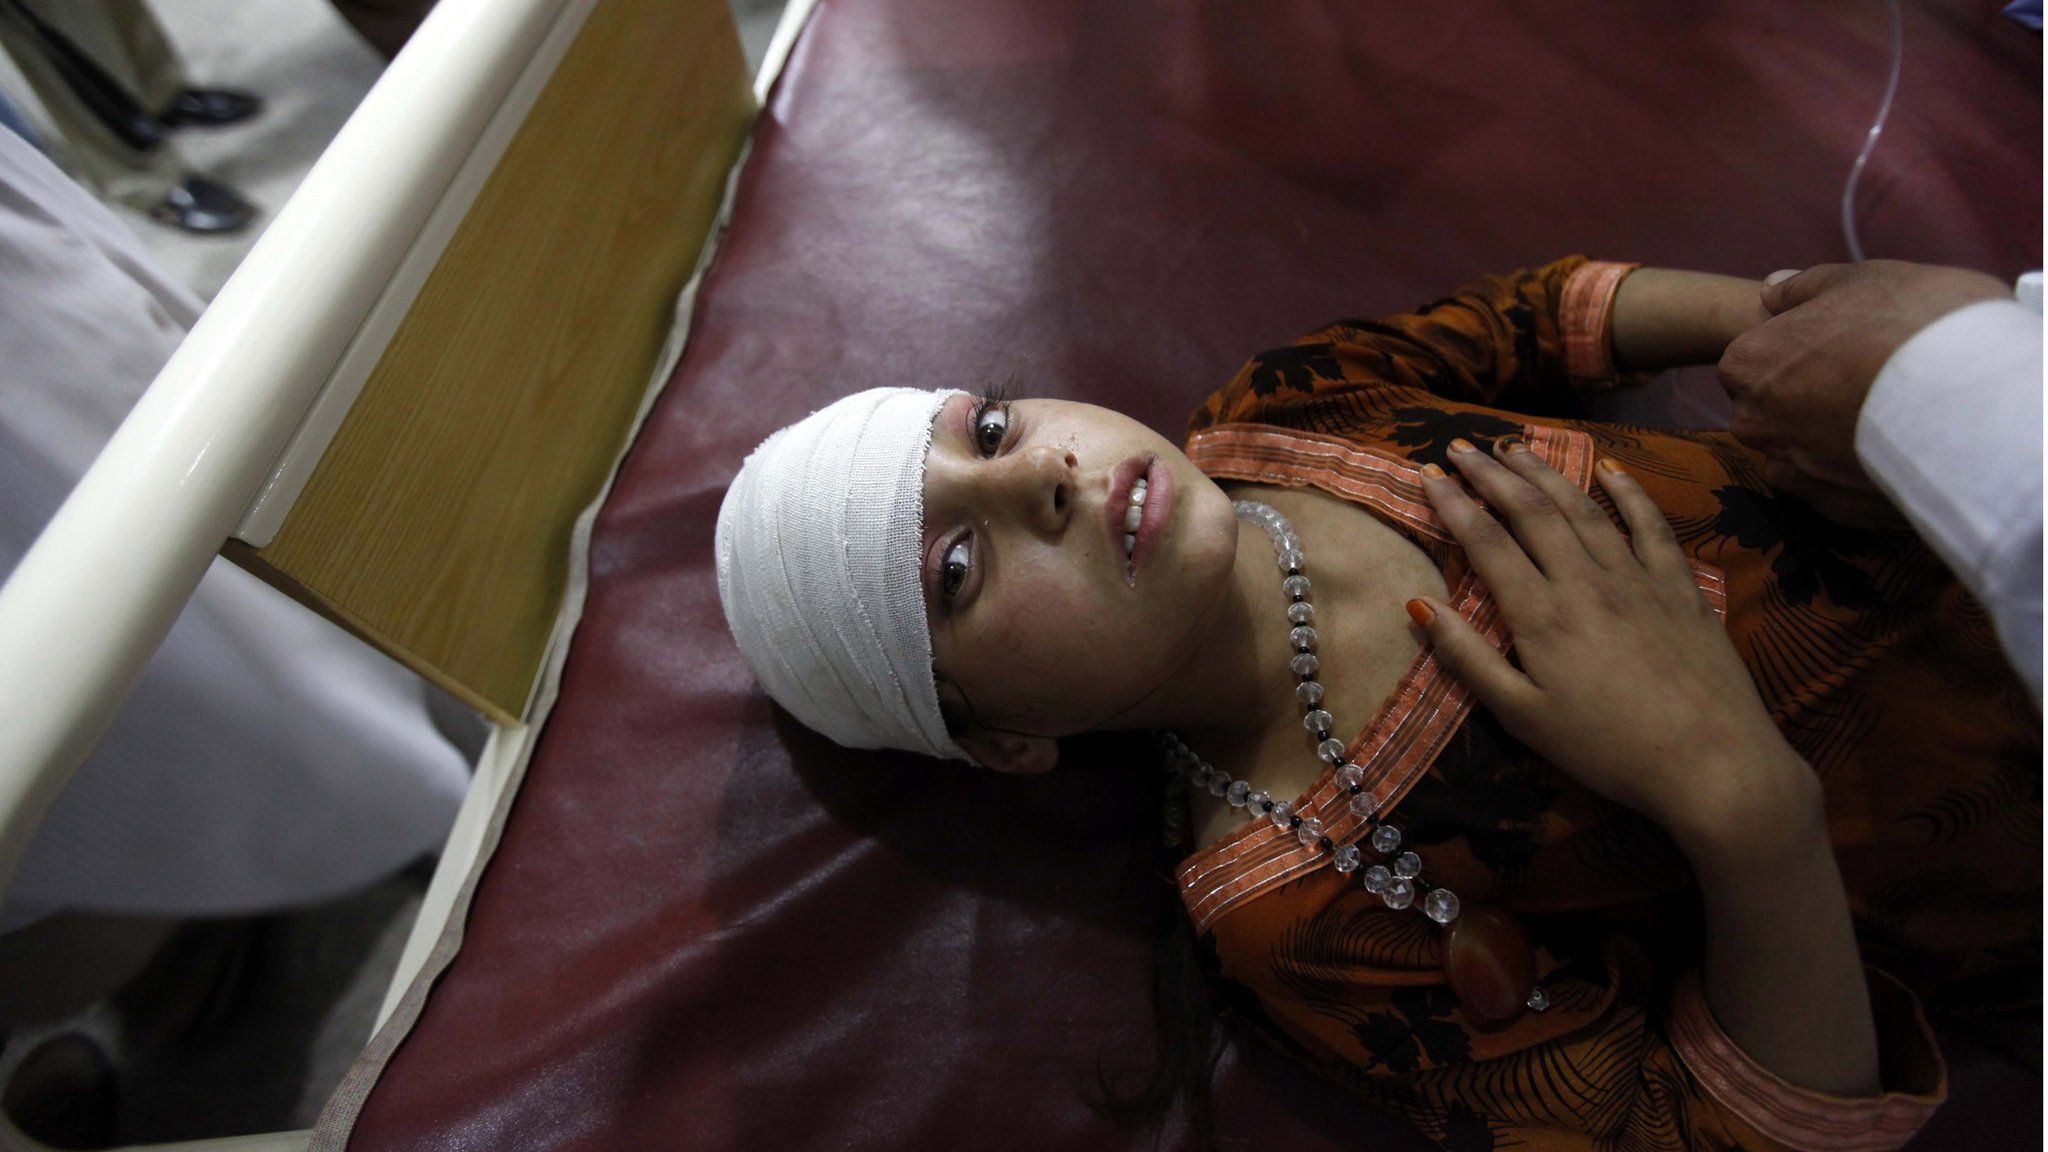 A girl injured in the earthquake receives medical treatment at a hospital in Peshawar, Pakistan (26 October 2015)